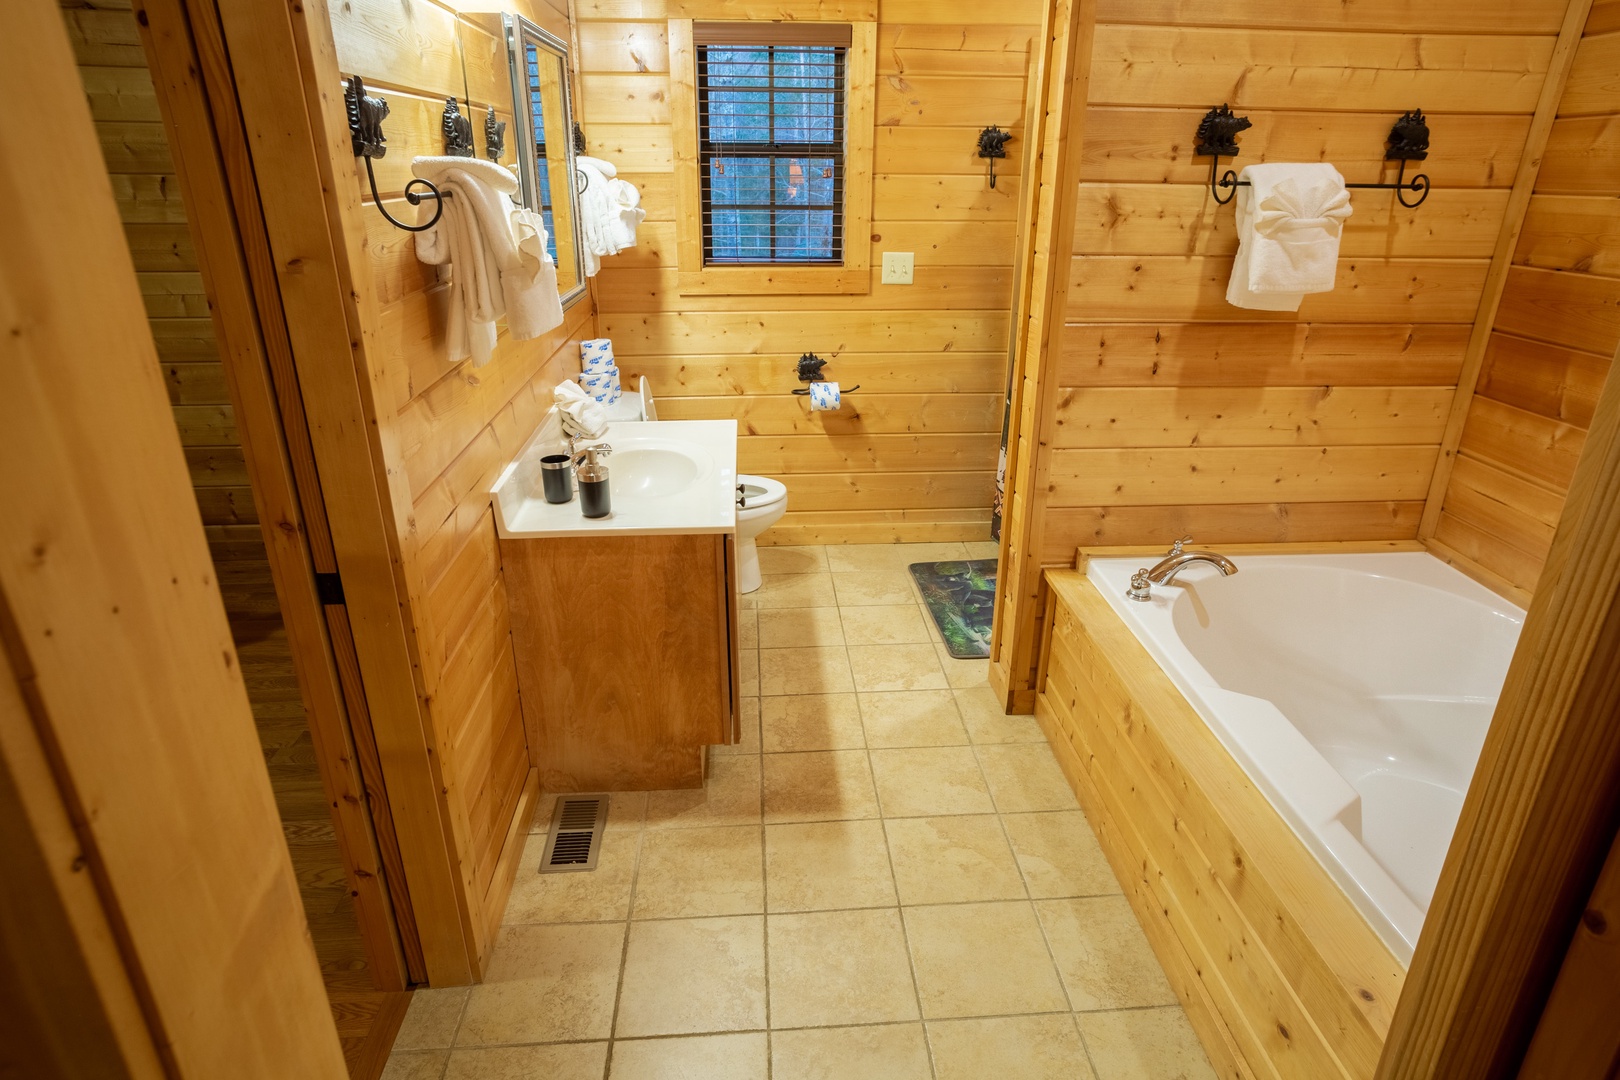 Bathroom at 3 Crazy Cubs, a 5 bedroom cabin rental located in pigeon forge